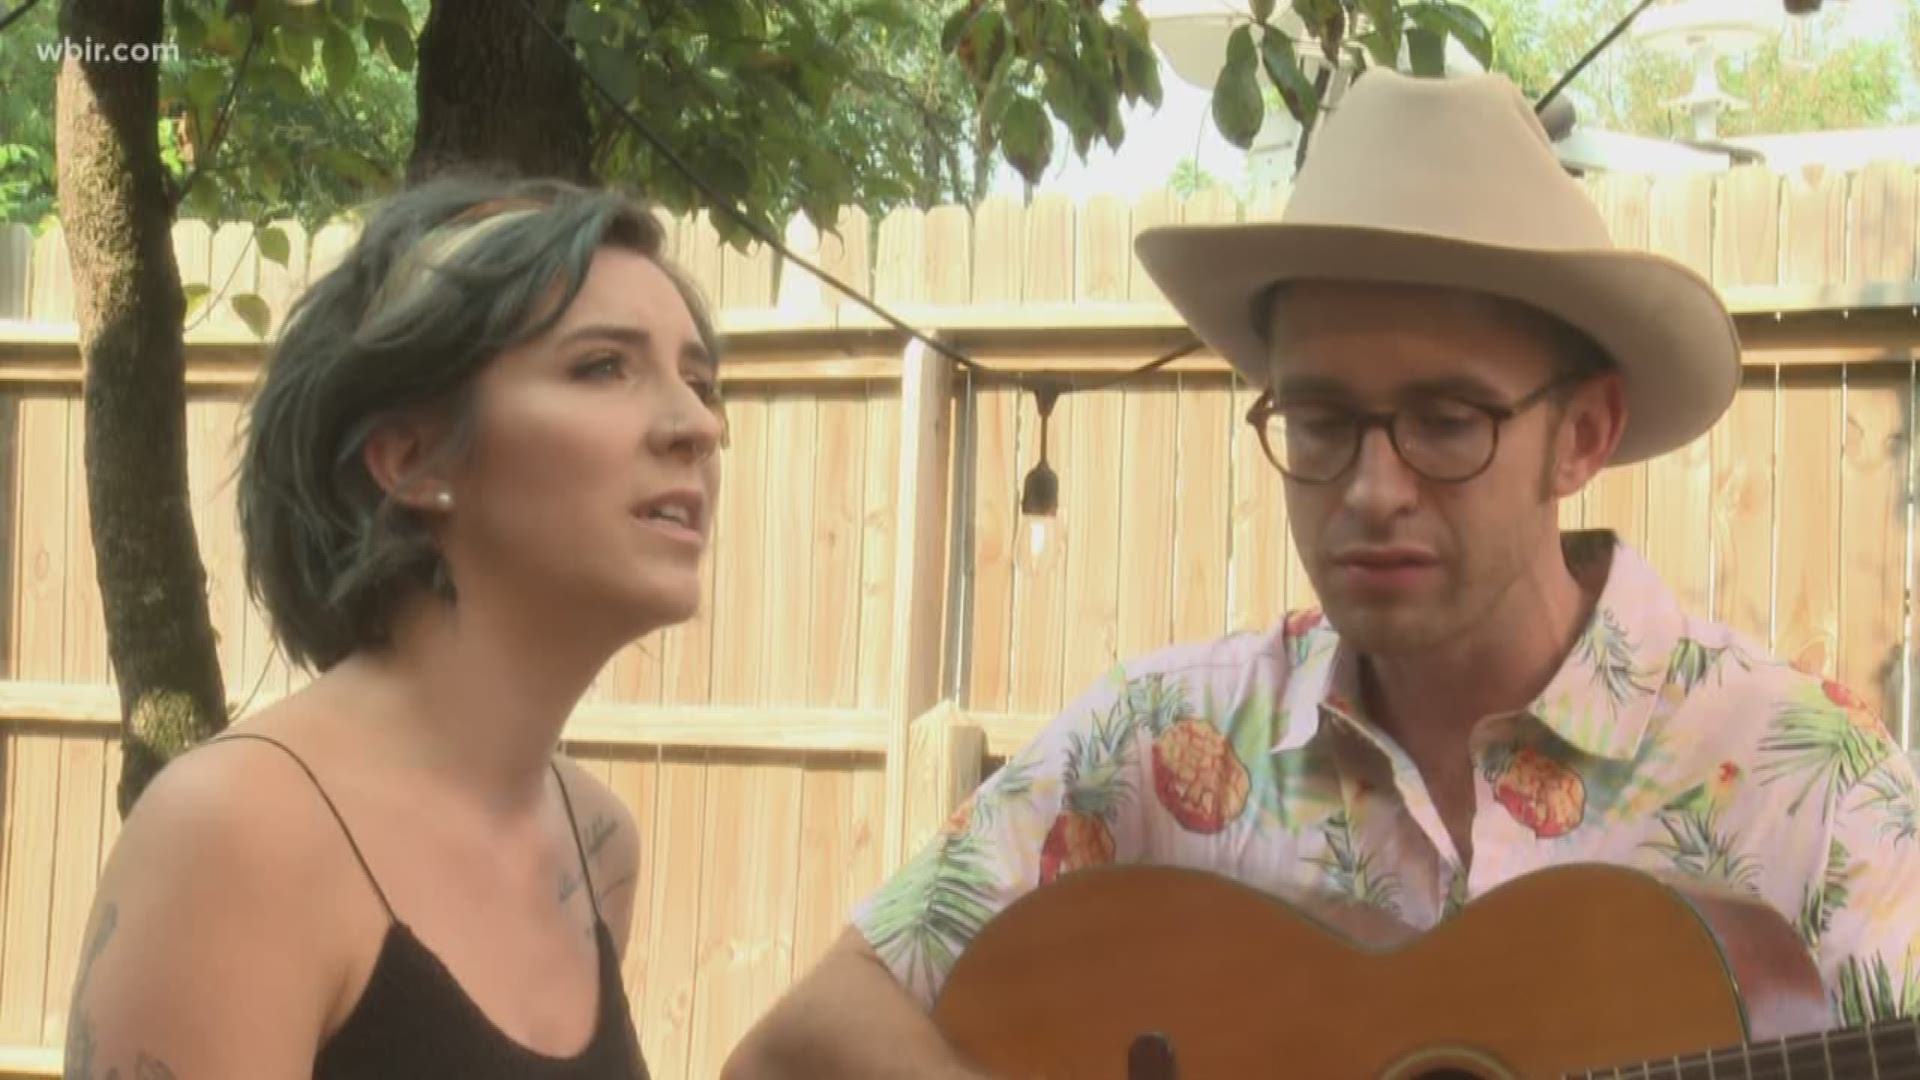 Adam & Sarrenna McNulty of Guy Marshall Band perform a song for us. They're one of many performers taking part in the inaugural Second Bell Music Festival. For more on the band visit guymarshallband.com
Aug. 13, 2018-4pm